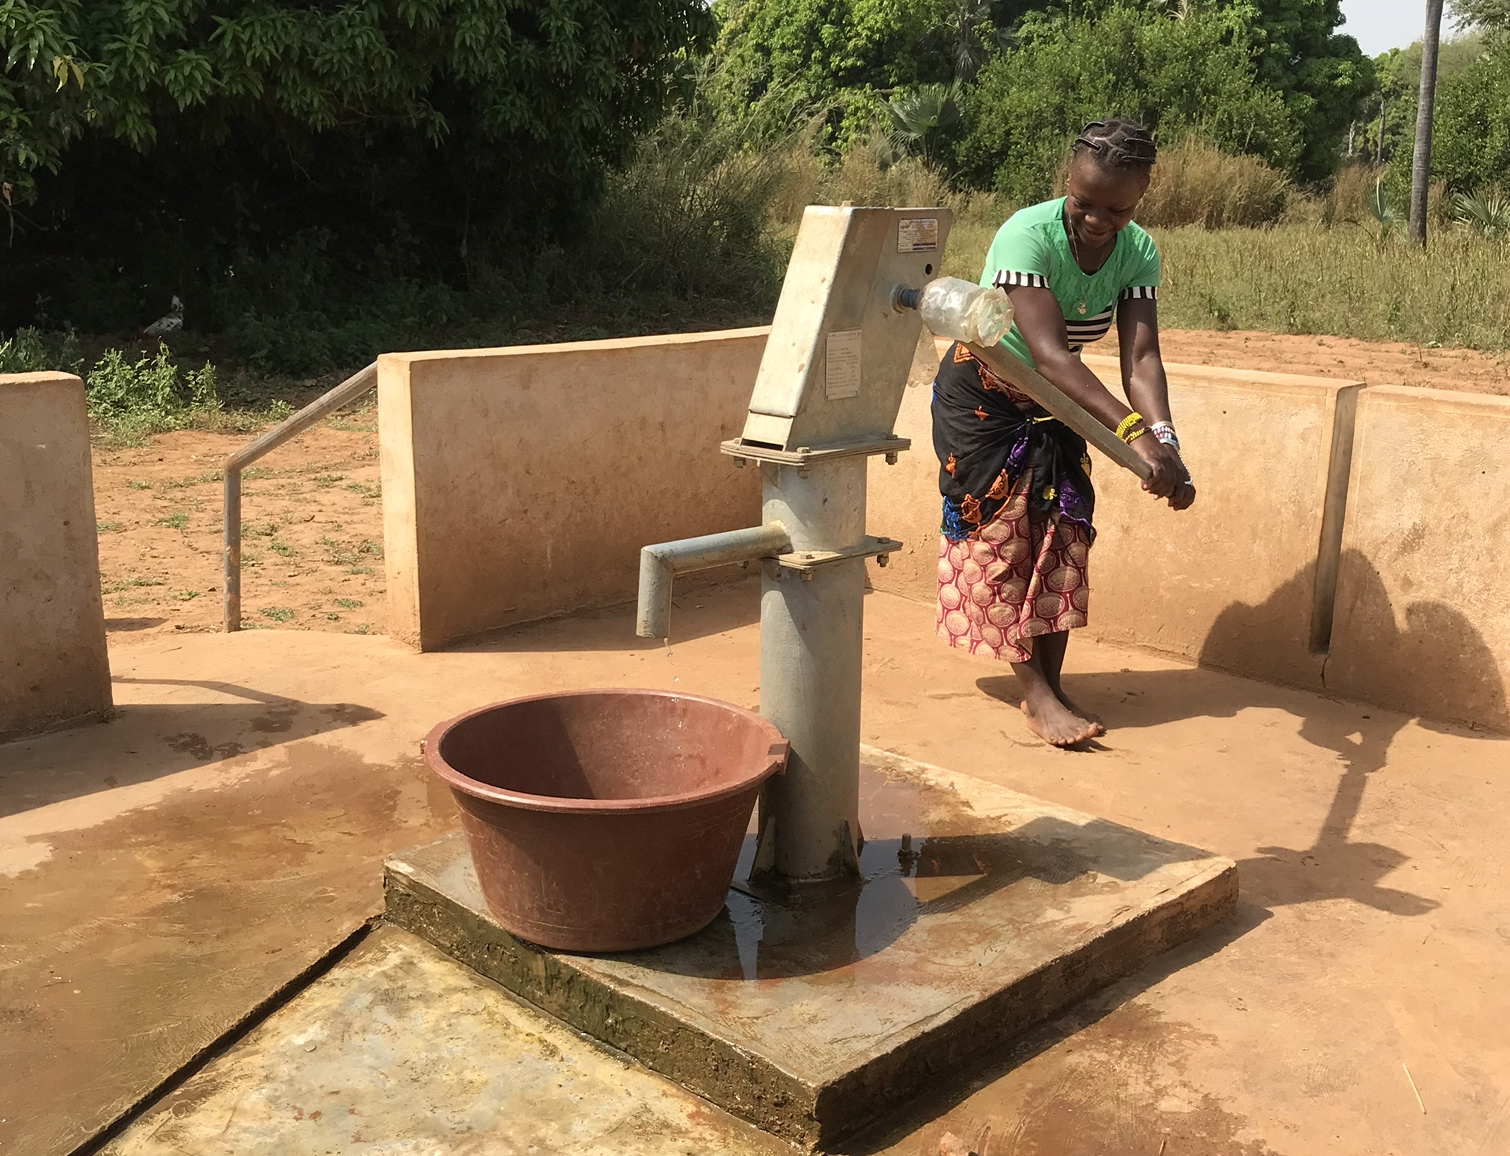 Gender and social equality in WASH